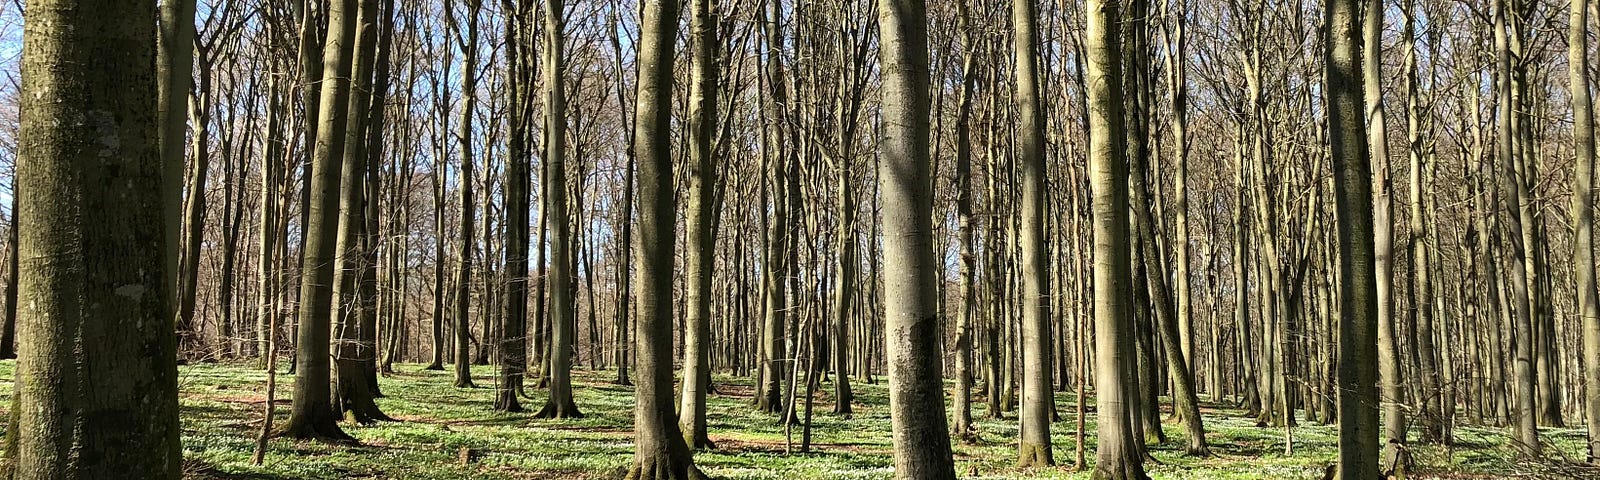 Beech trees with a blanket of white wood anemones covering the forest floor.